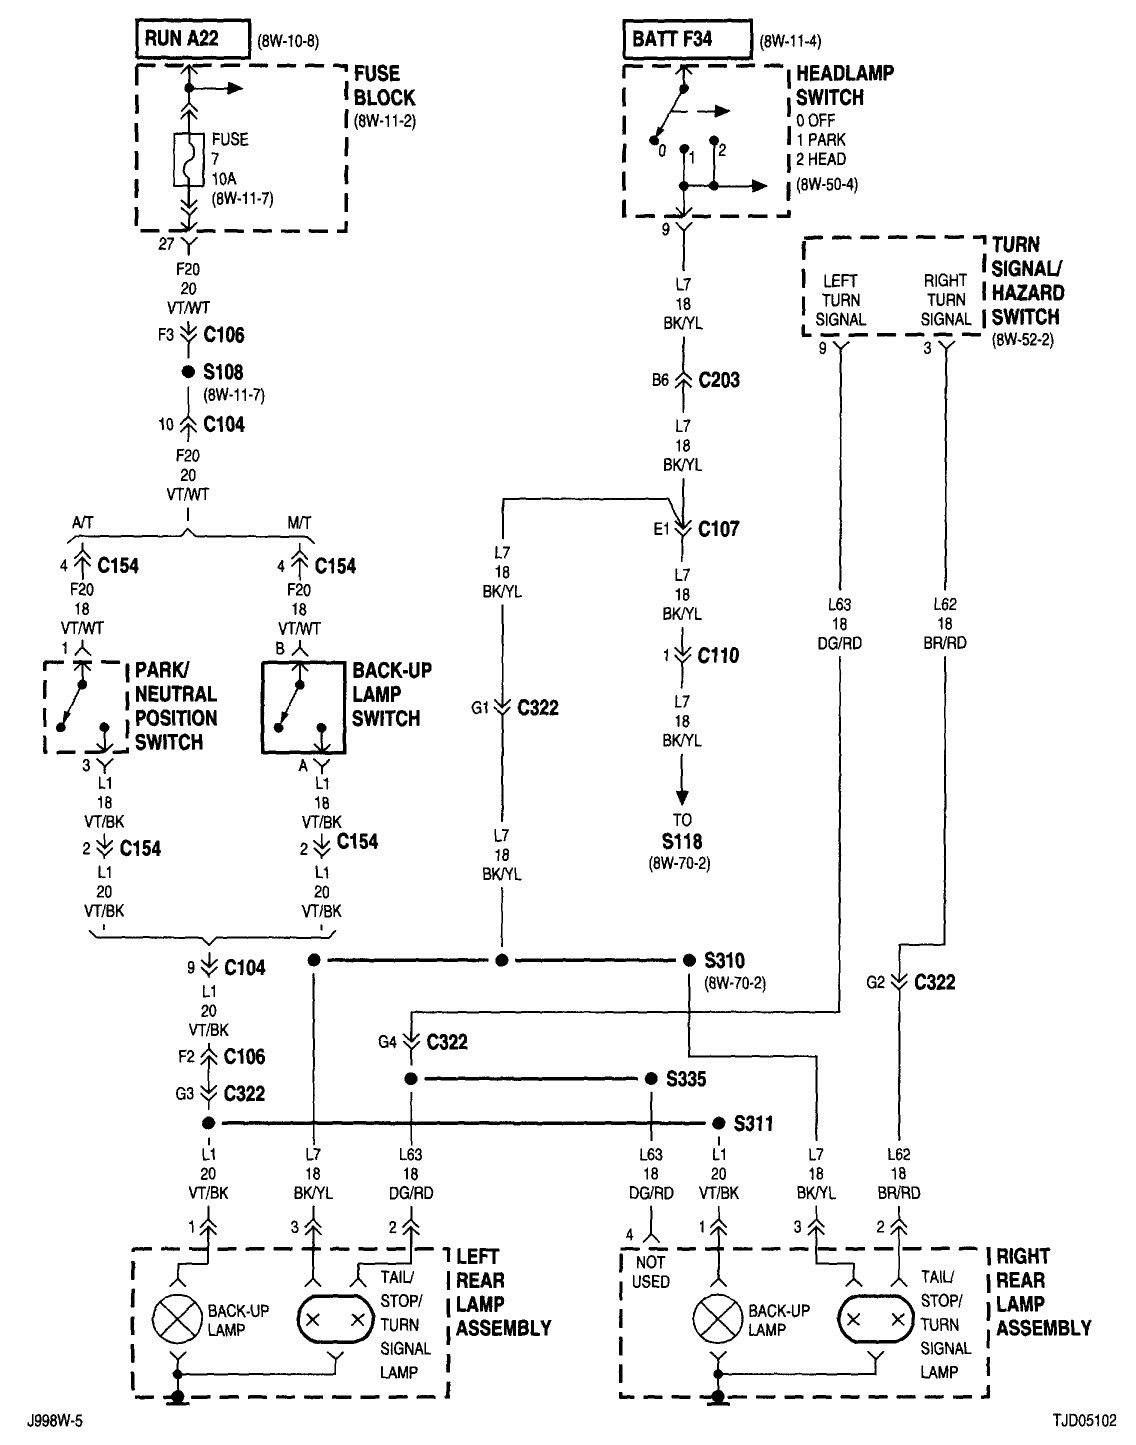 2008 Jeep Grand Cherokee Stereo Wiring Diagram from mainetreasurechest.com